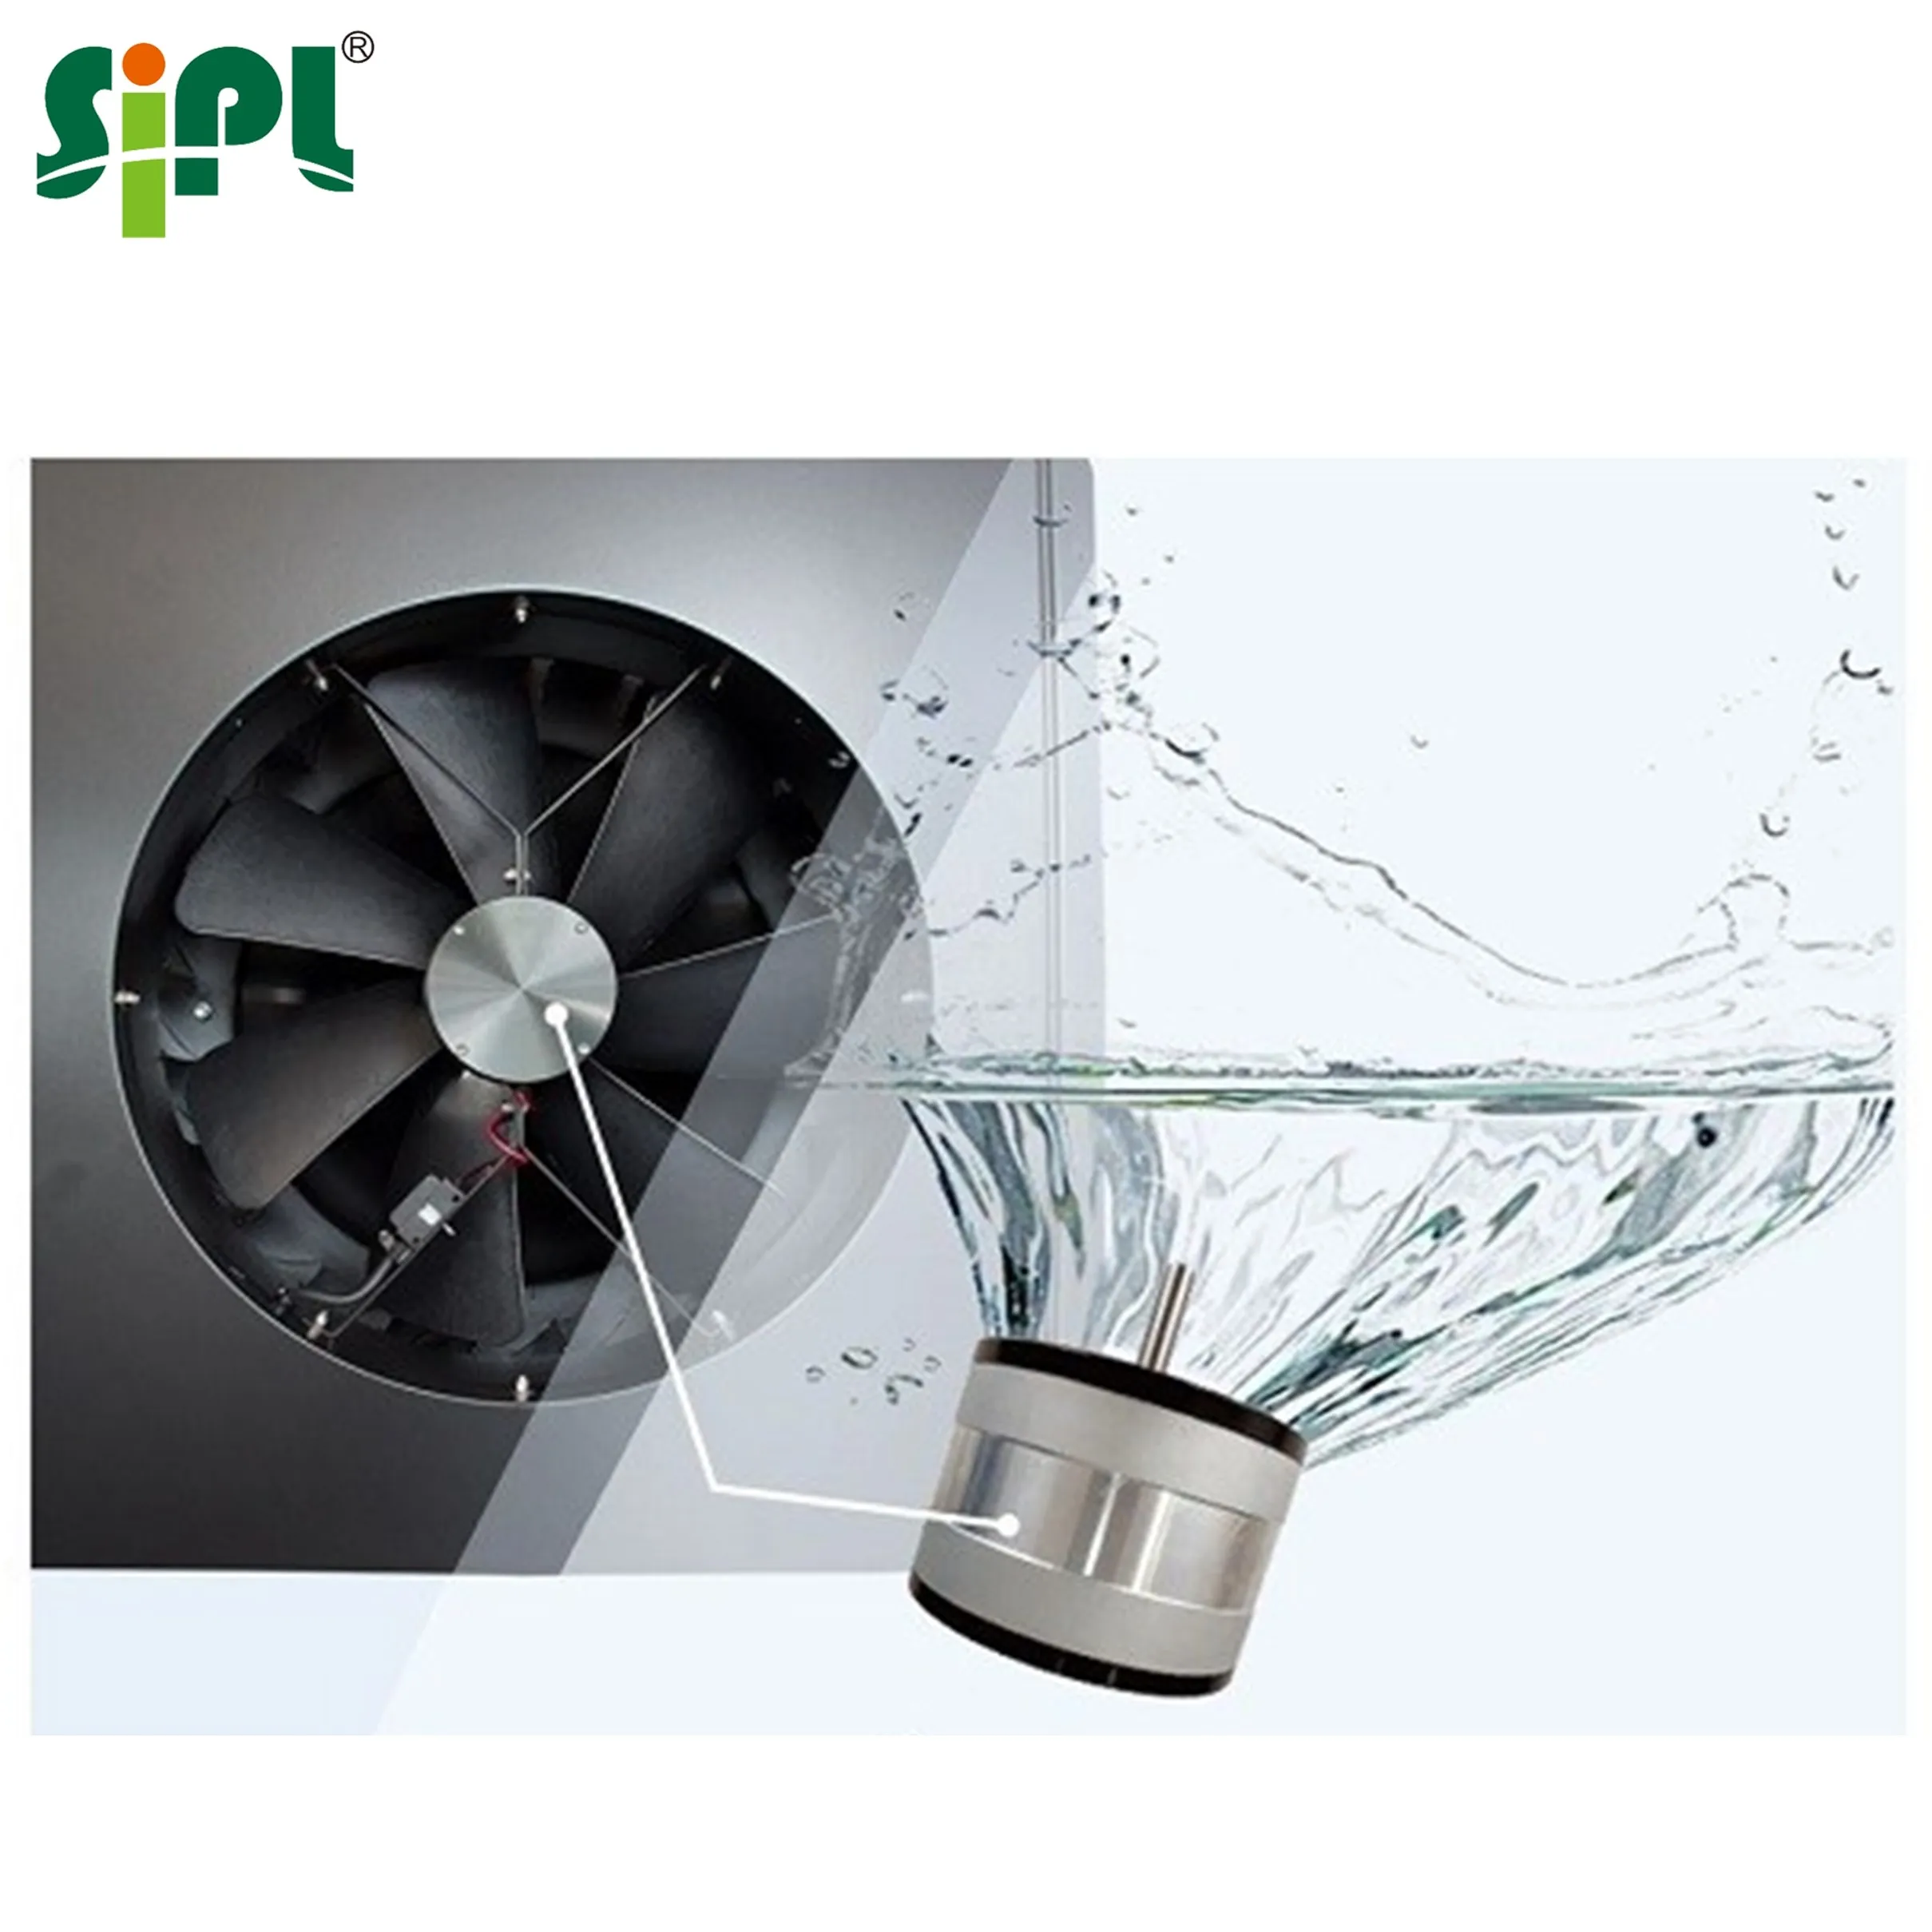 Roof Top Tunnel Green Air Vent High Speed Ceiling Ventilation Solar Powered Attic Heat Extractor Fan 14' DC Air Circulator Fan